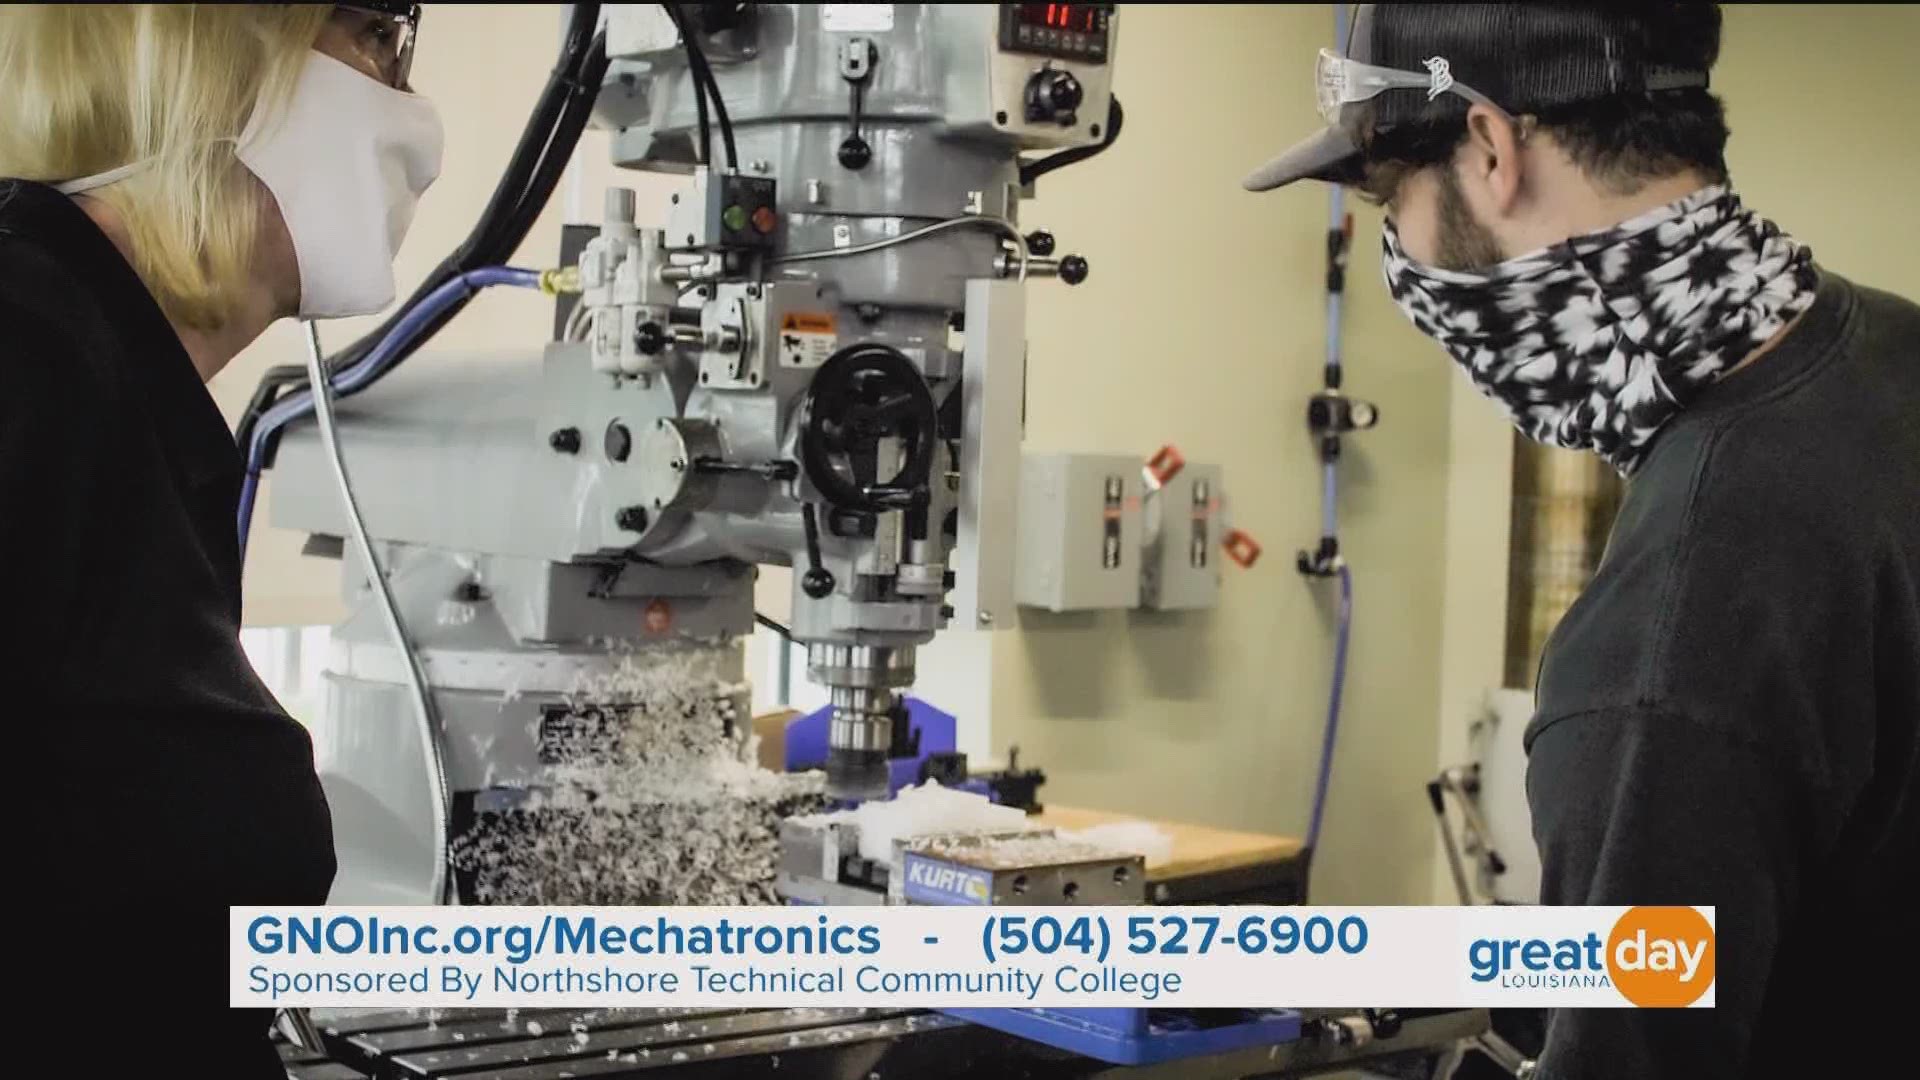 To learn more, visit www.gnoinc.org/mechatronics